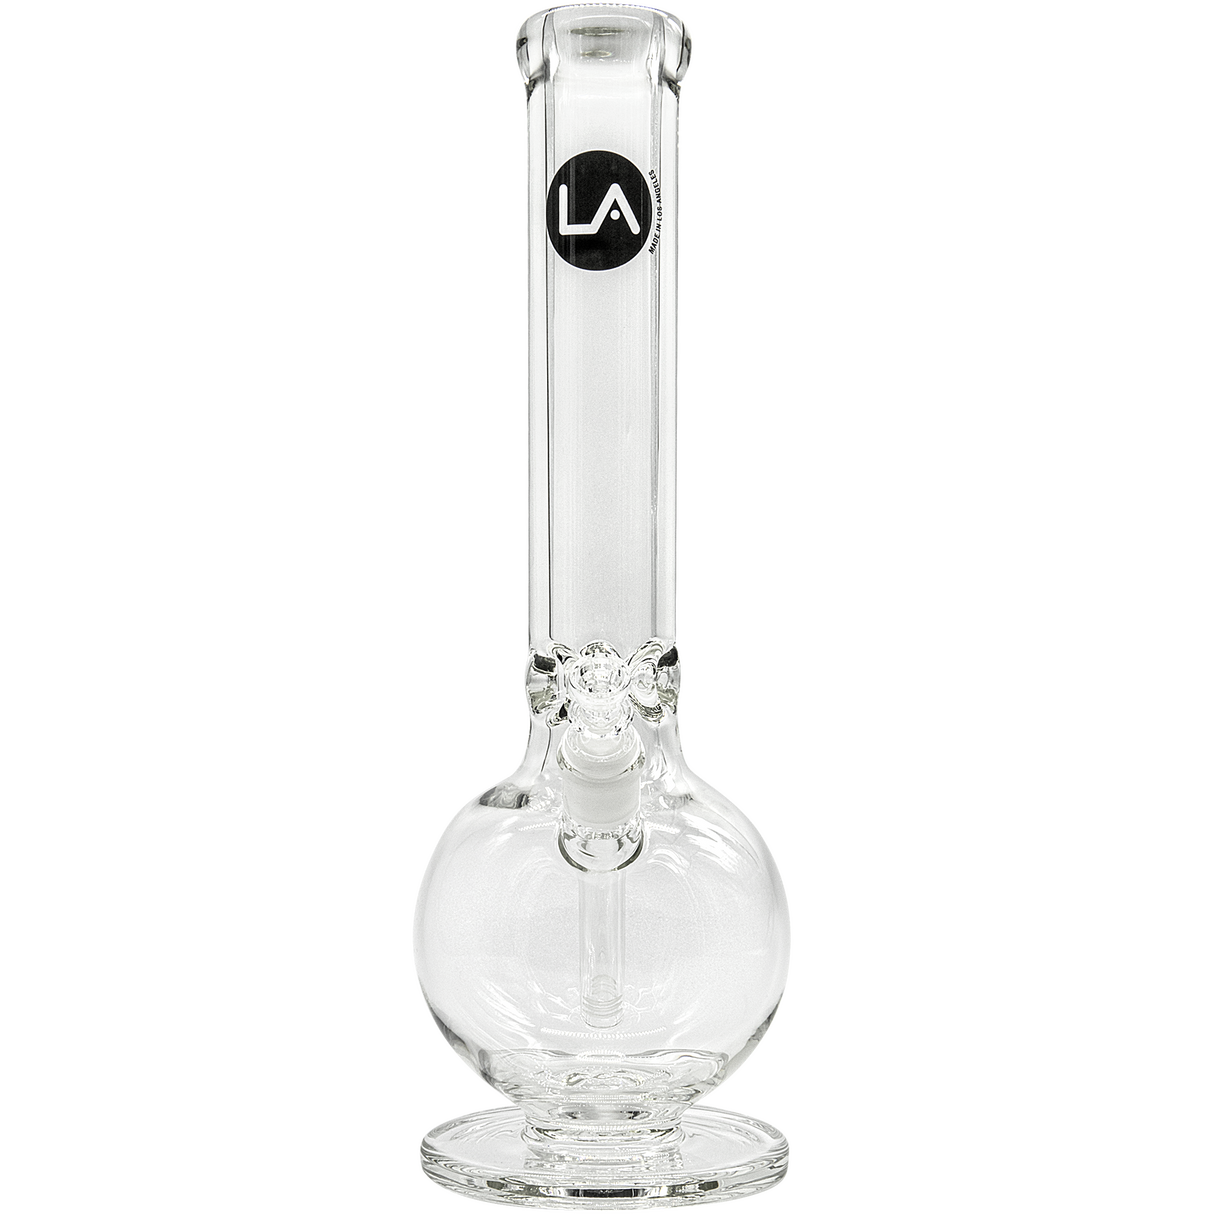 LA Pipes "Bazooka" 9mm Thick Glass Bong, 16-18" Tall with Bubble Design, Front View